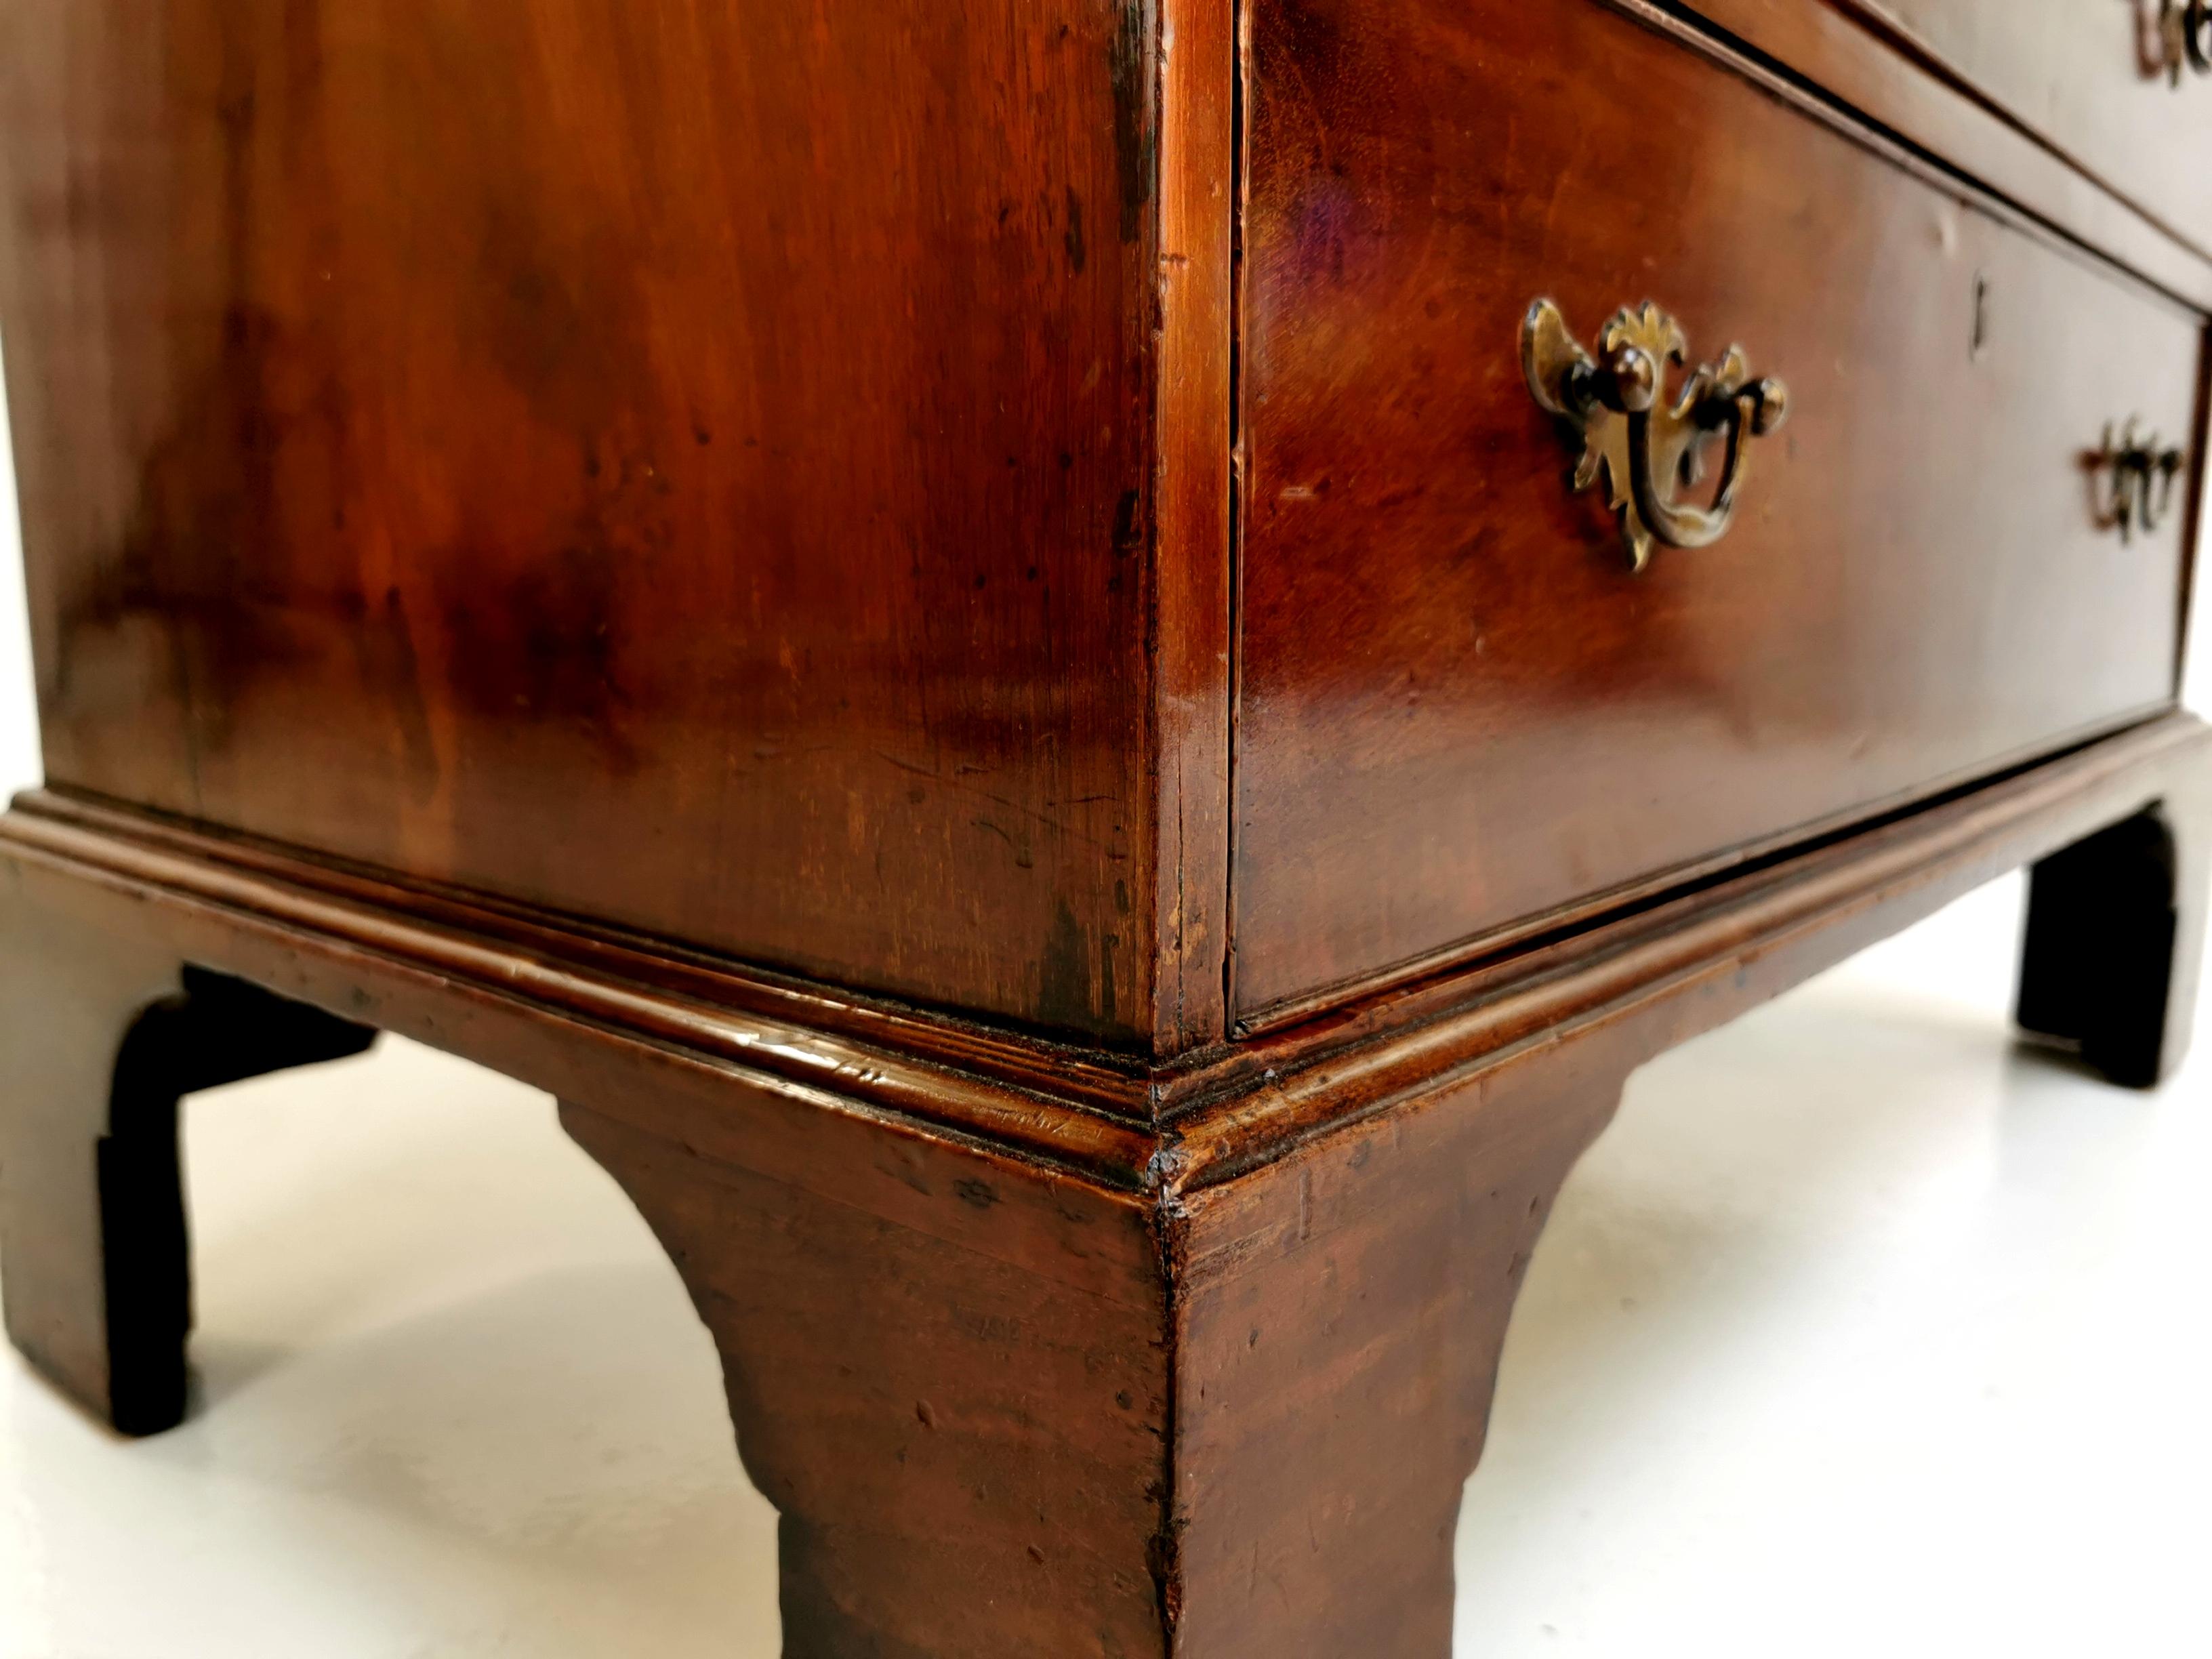 18th century bachelors 

This high quality late 1700s, Georgian bachelors chest of drawers is richly colored, its glean typical of the furniture associated with that period.

A Bachelor’s chest, it has a folding rectangular top, four long